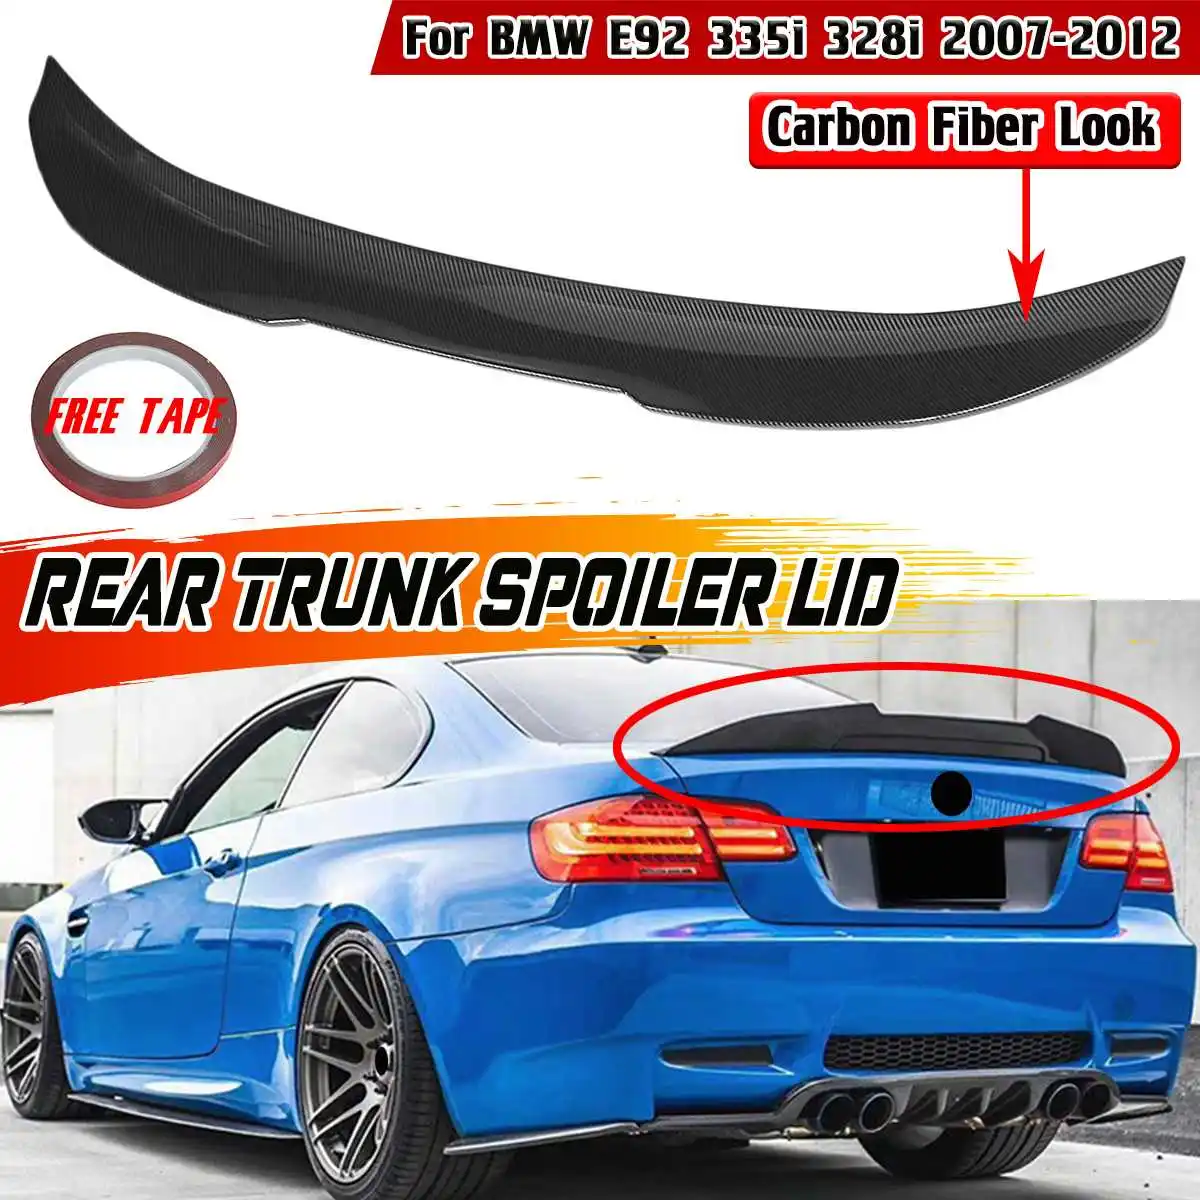 Top wing Maxton style BMW E91 2004-2012 